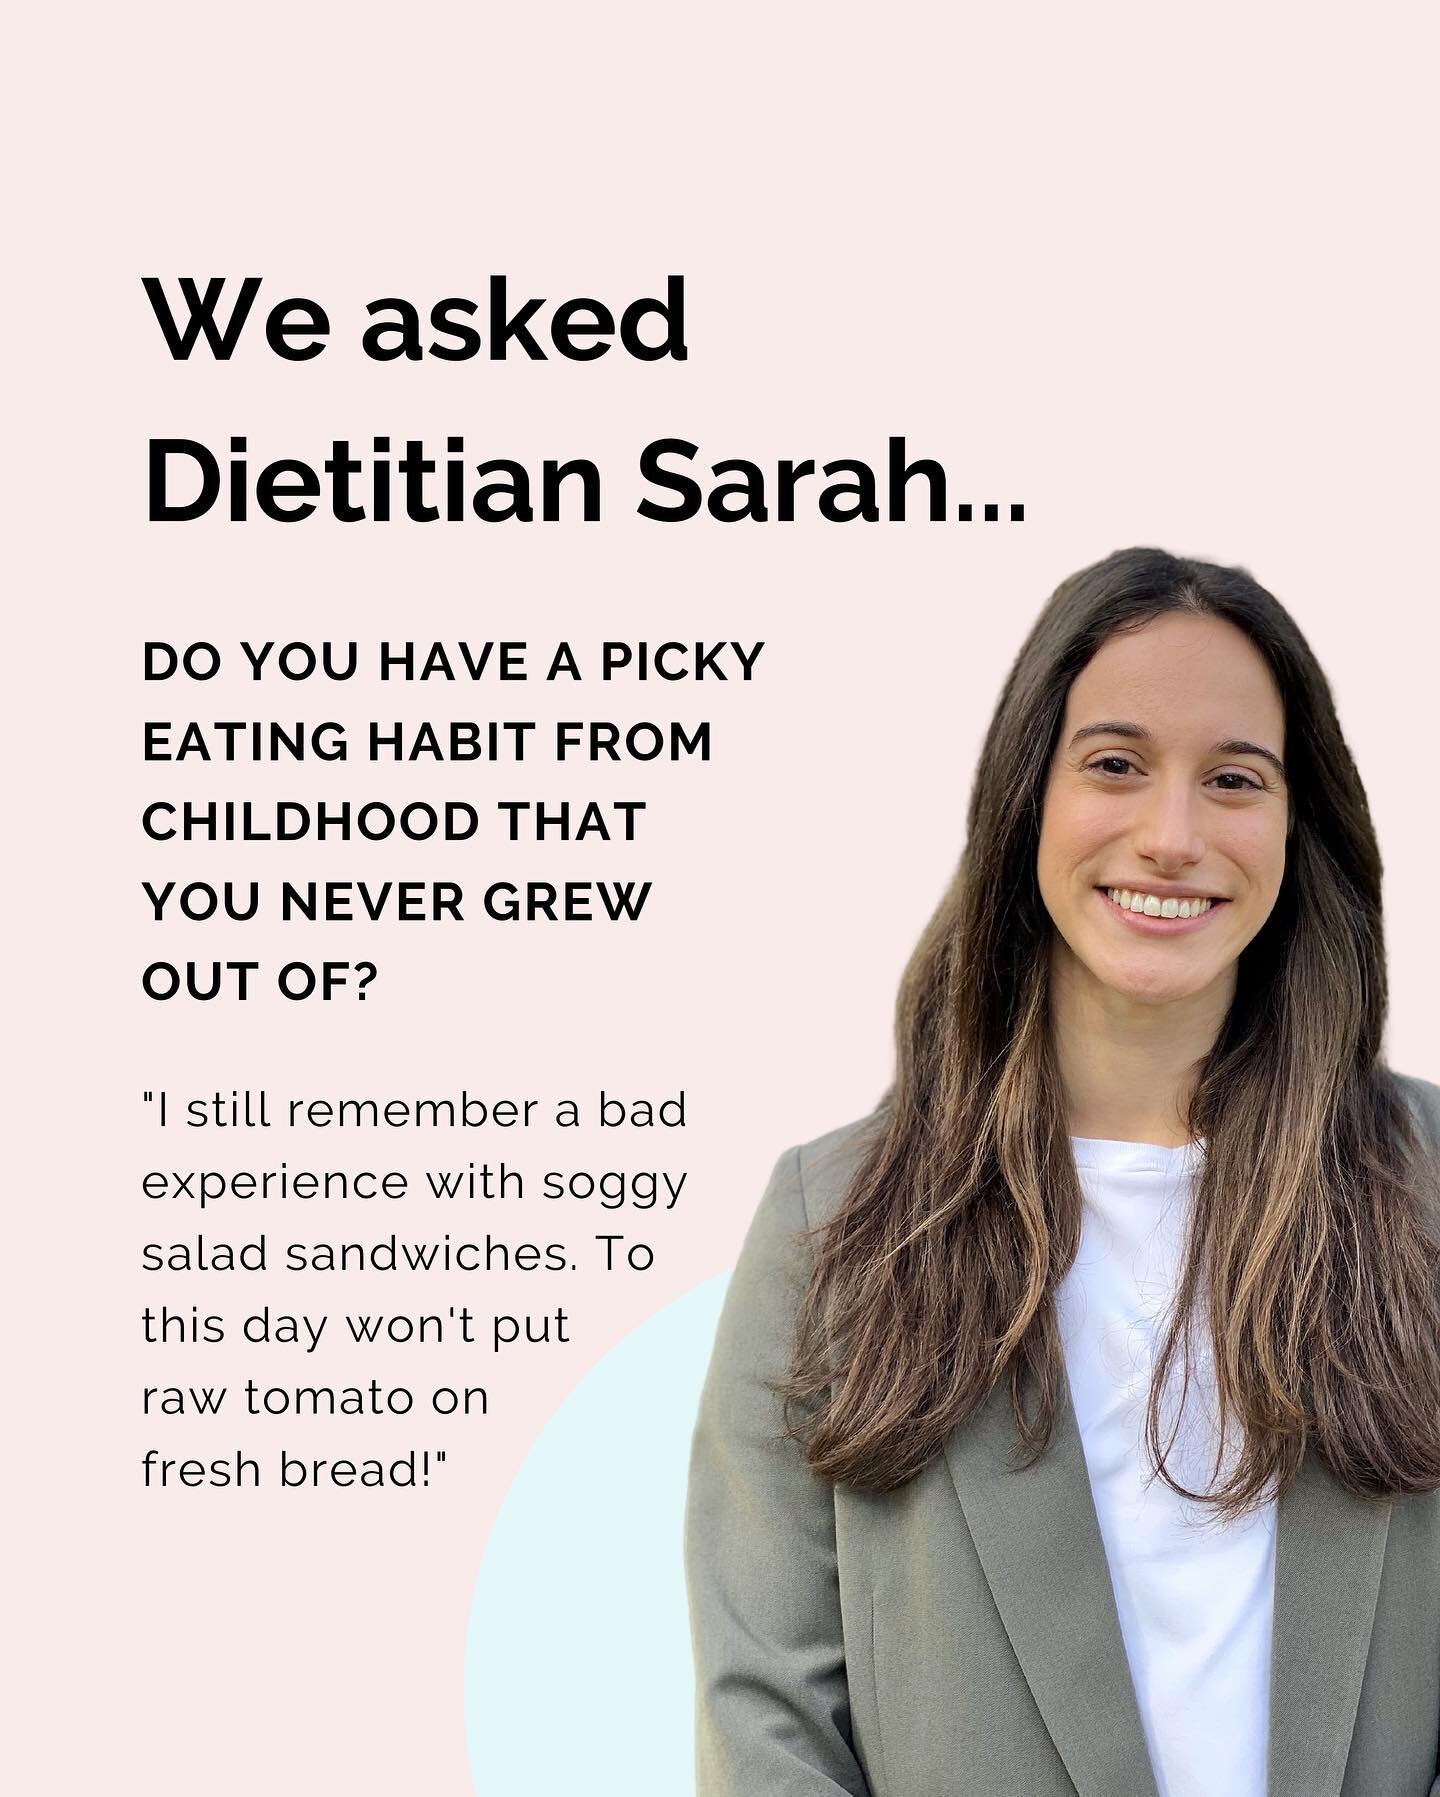 Even our Dietitian Sarah wasn't a fan of salad sandwiches as a child, and she still isn't today 😅🥪

Remember, it's okay if your little one has certain food preferences. Let's keep exploring new foods and finding what works for them ✨

Share your pi